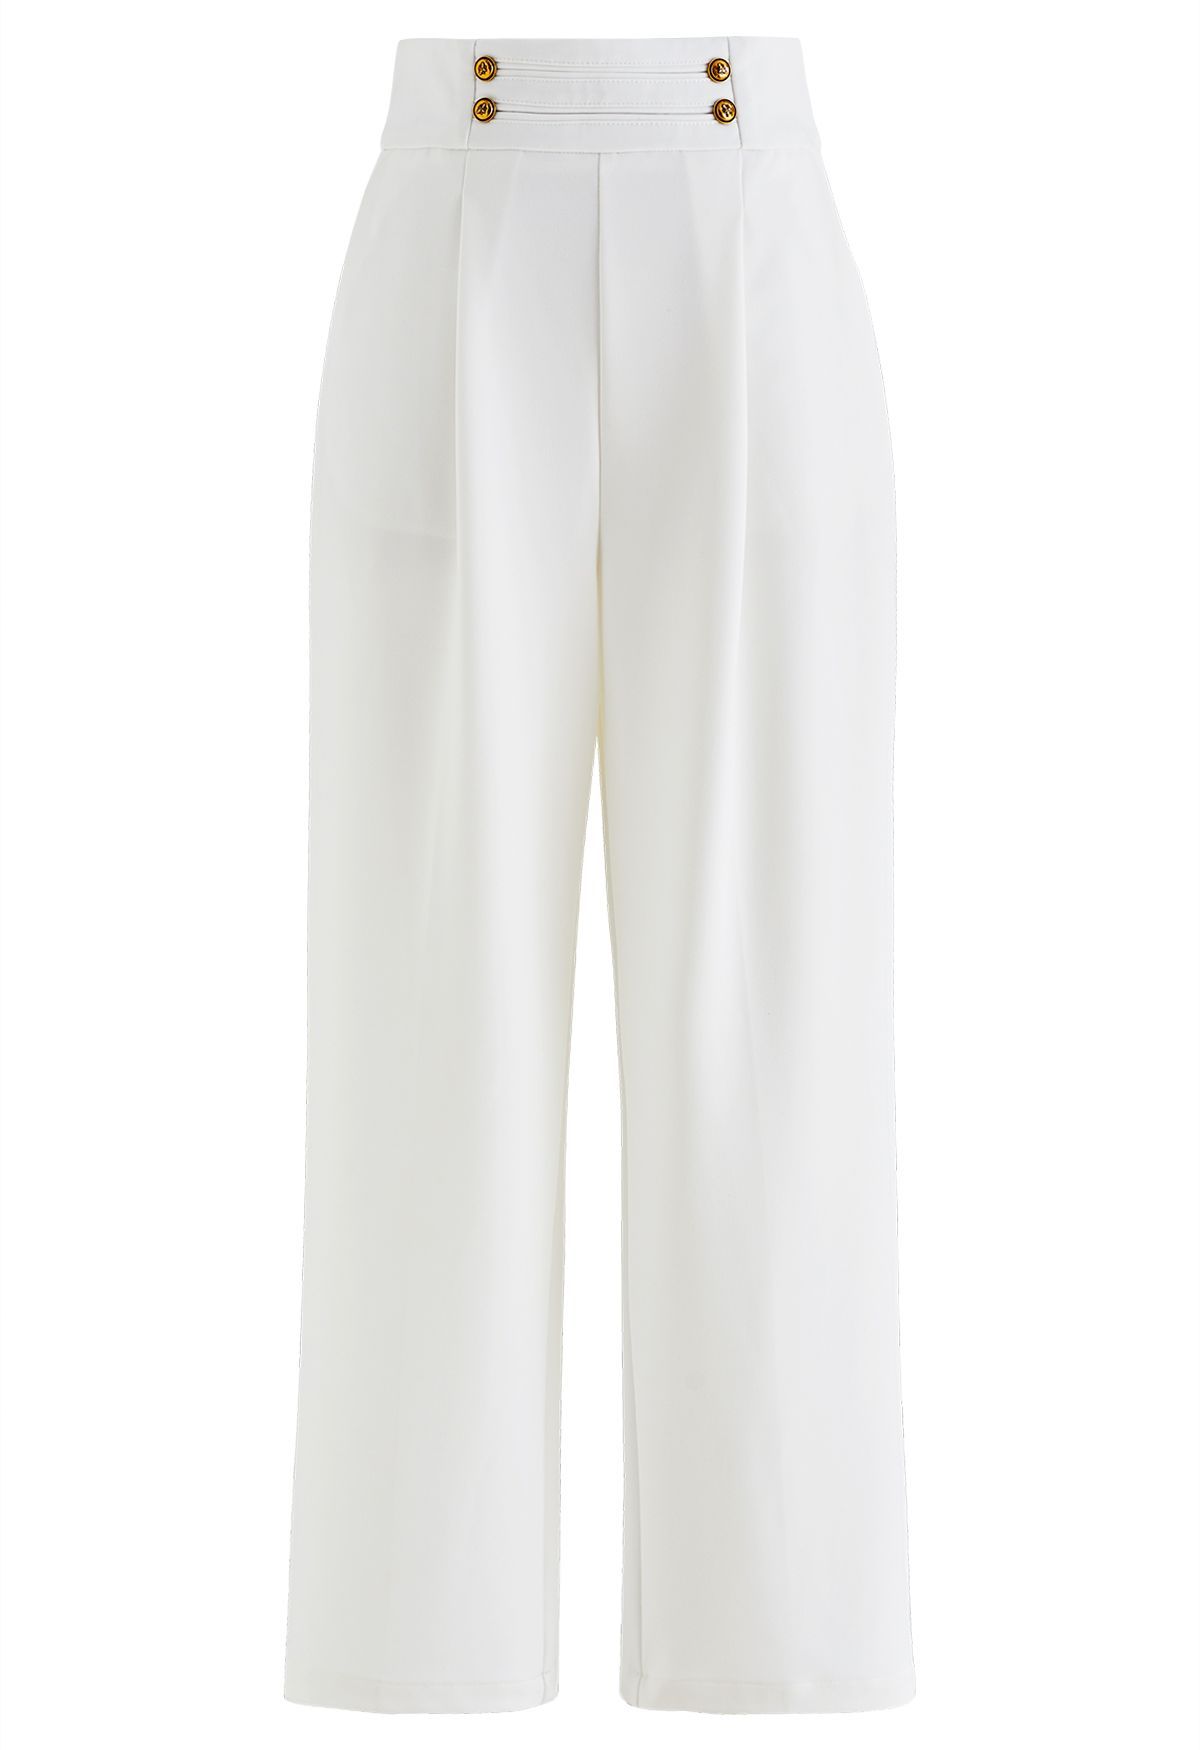 Golden Button Wide-Leg Pants in White | Chicwish